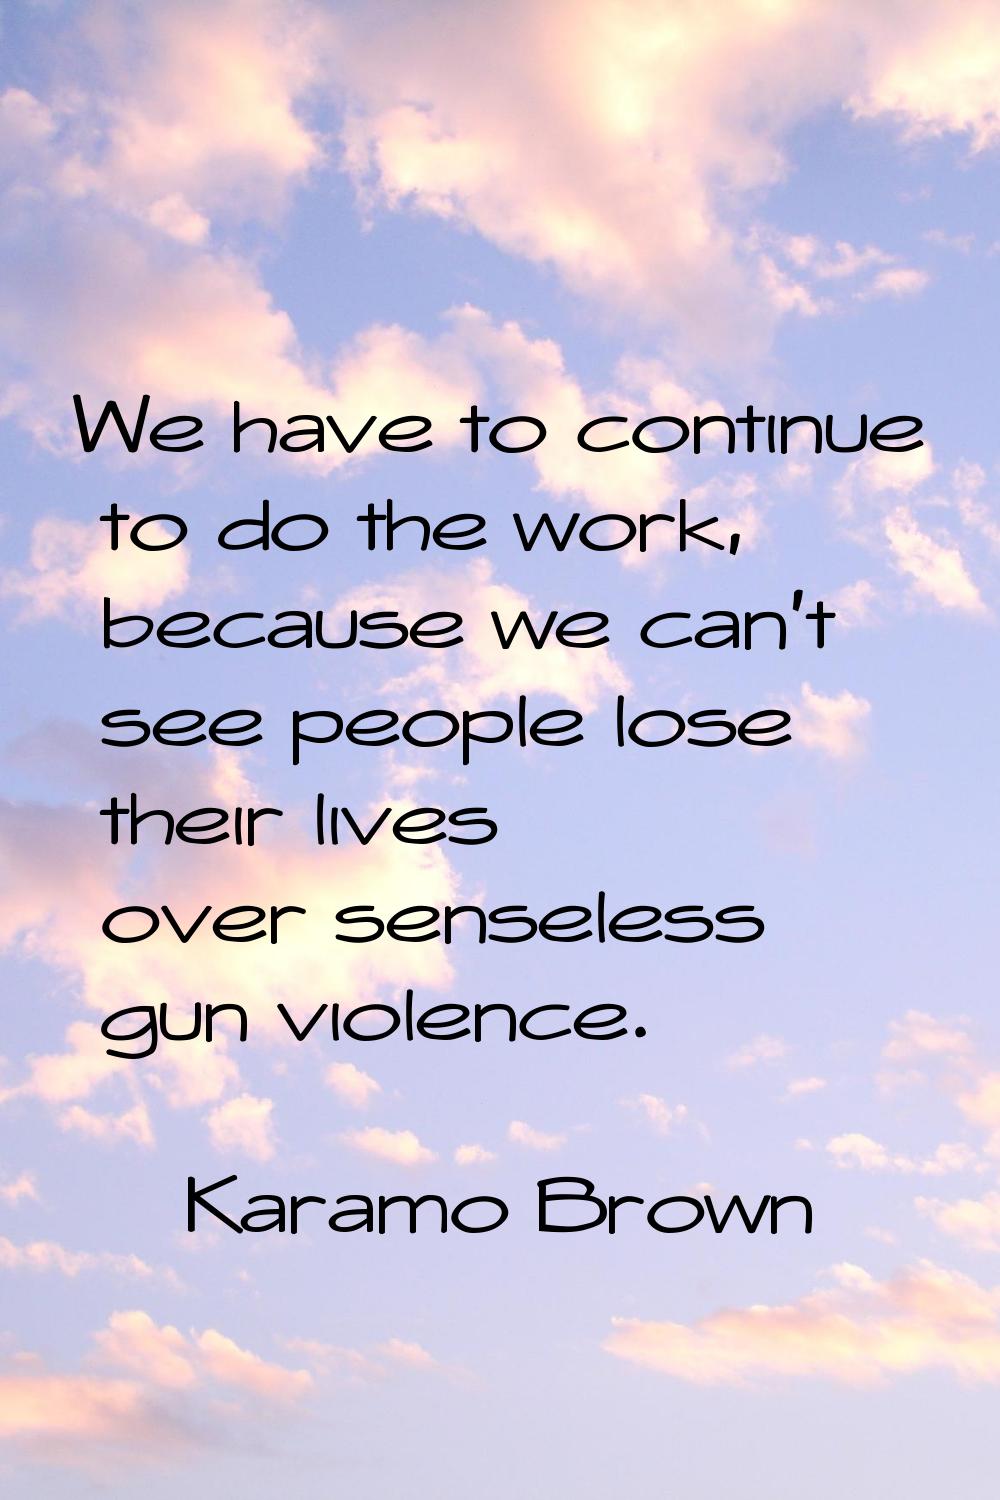 We have to continue to do the work, because we can't see people lose their lives over senseless gun